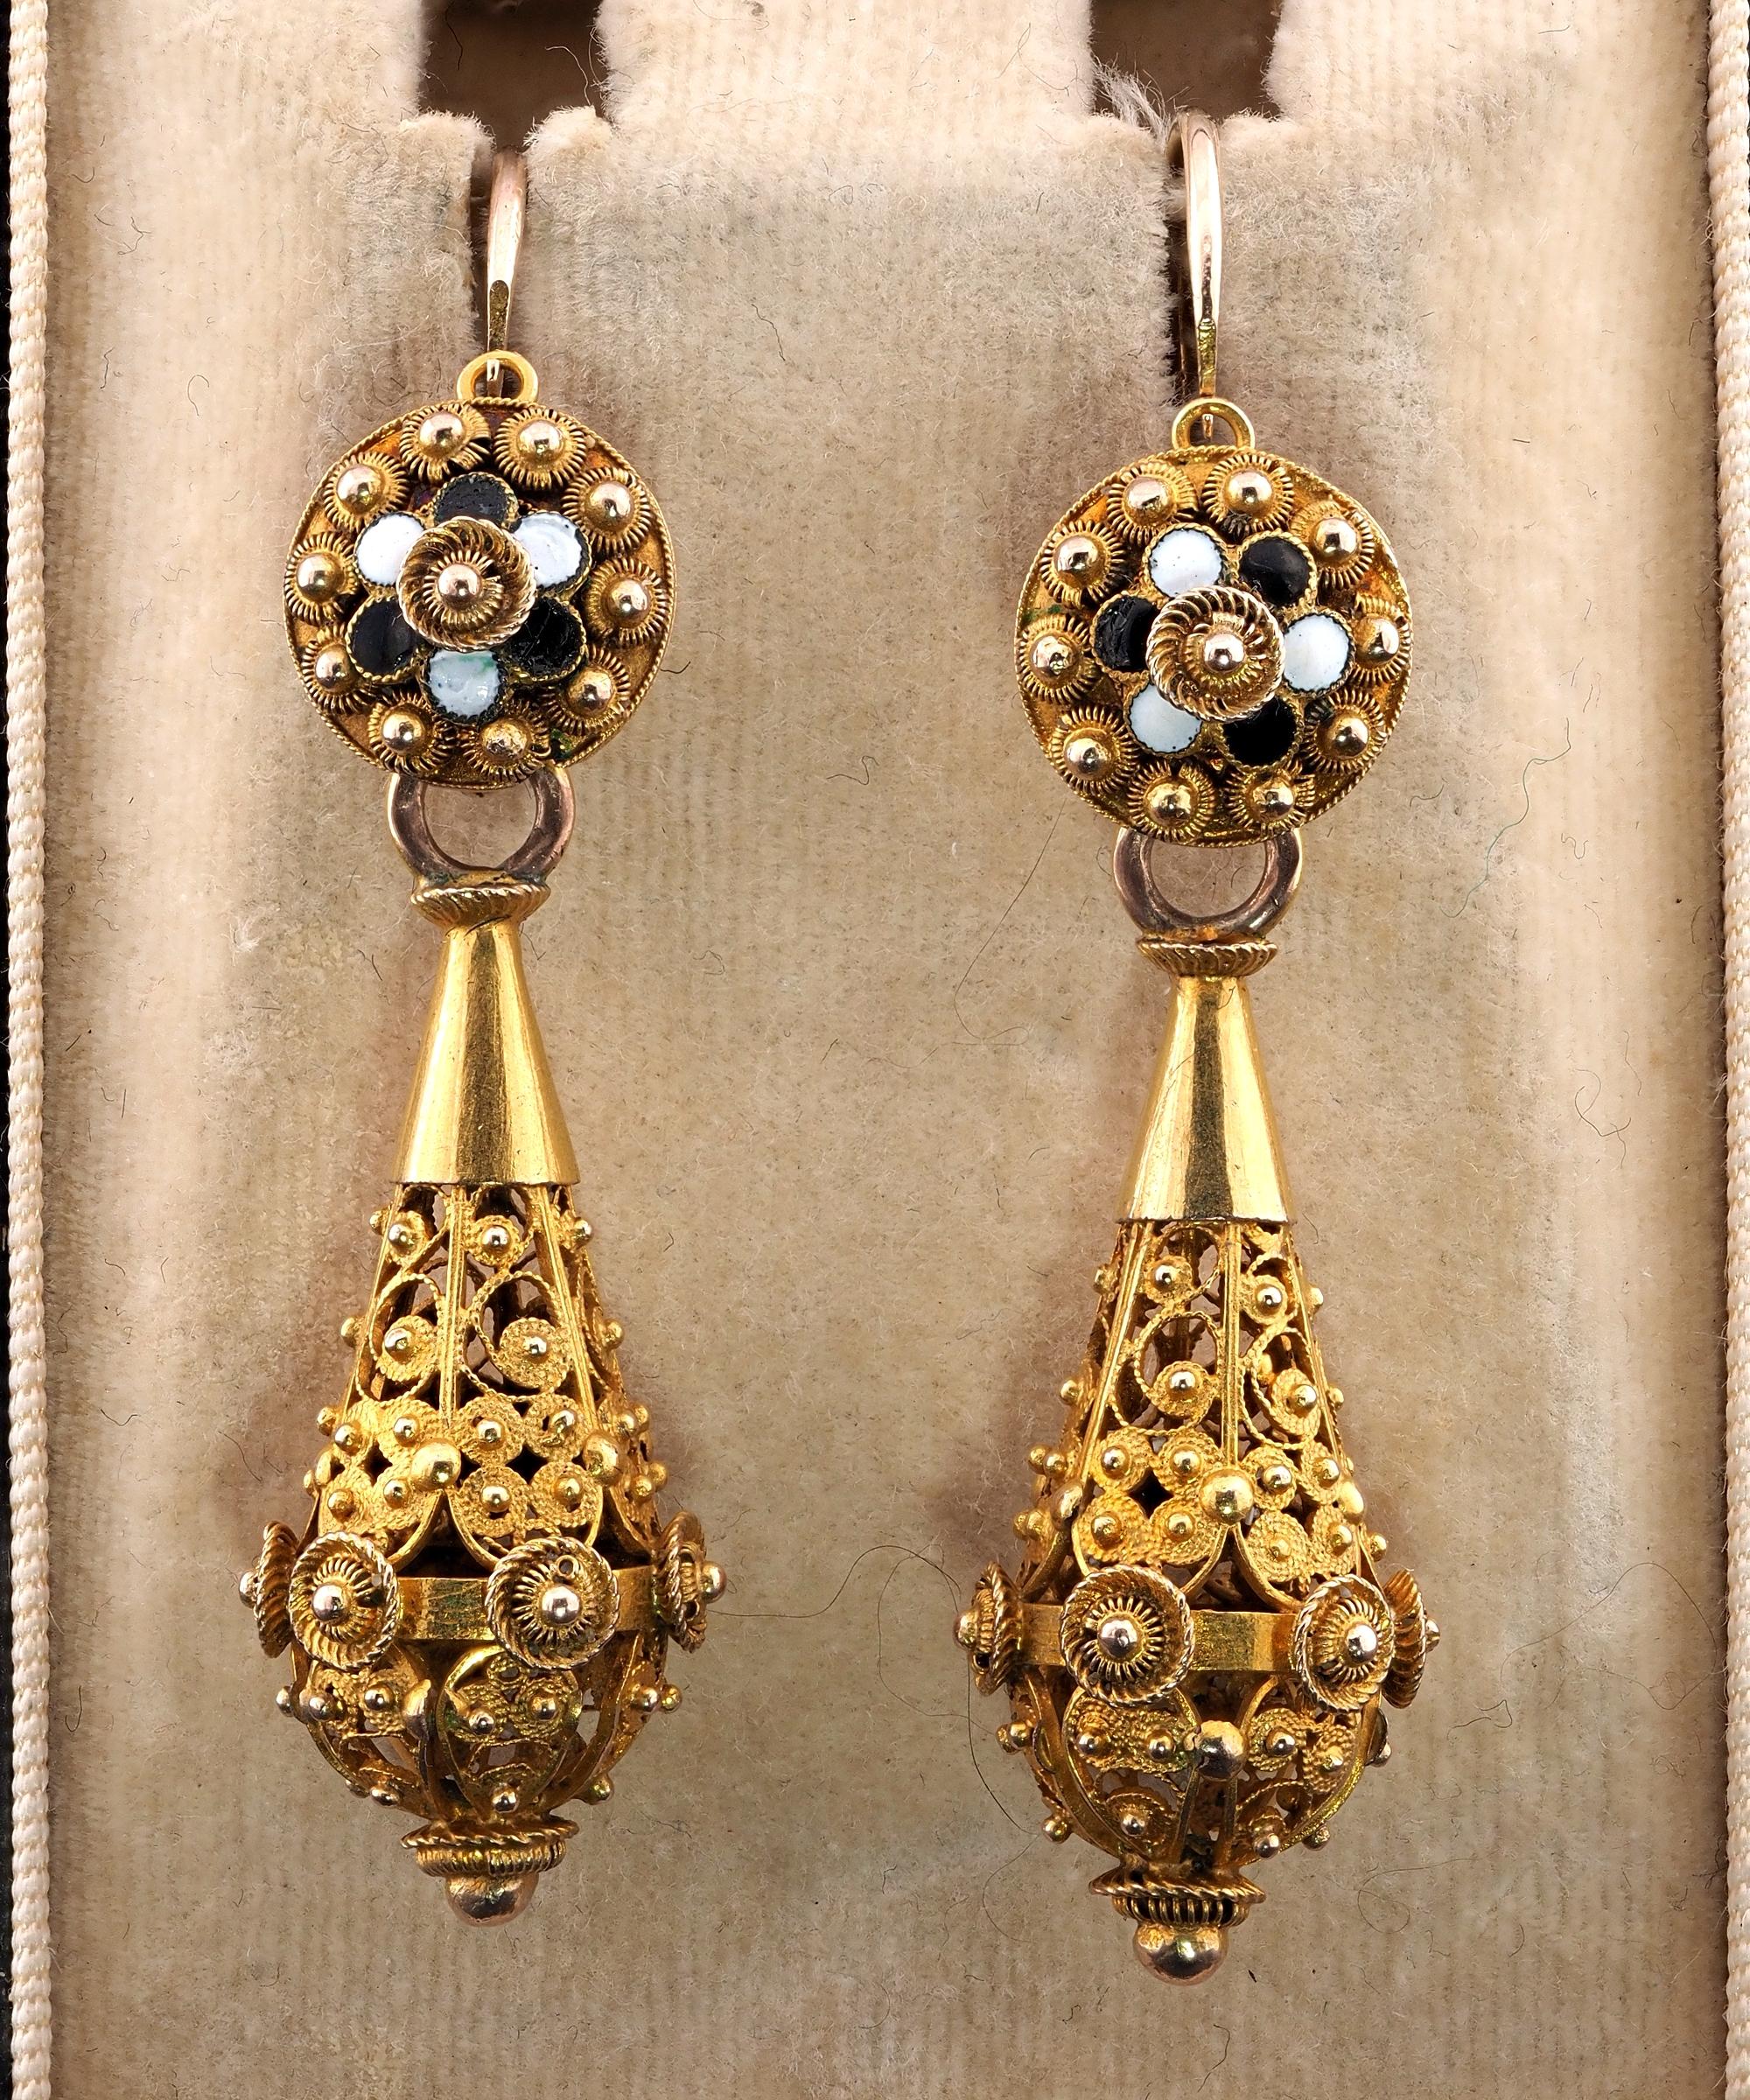 Georgian to Treasure
Marvellous and quite spectacular art work from the Georgian period are these long torpedo night/day earrings, authentic 1800 ca
Magnificent Cannetille and granulation work created a surprisingly beautiful artwork and intricate